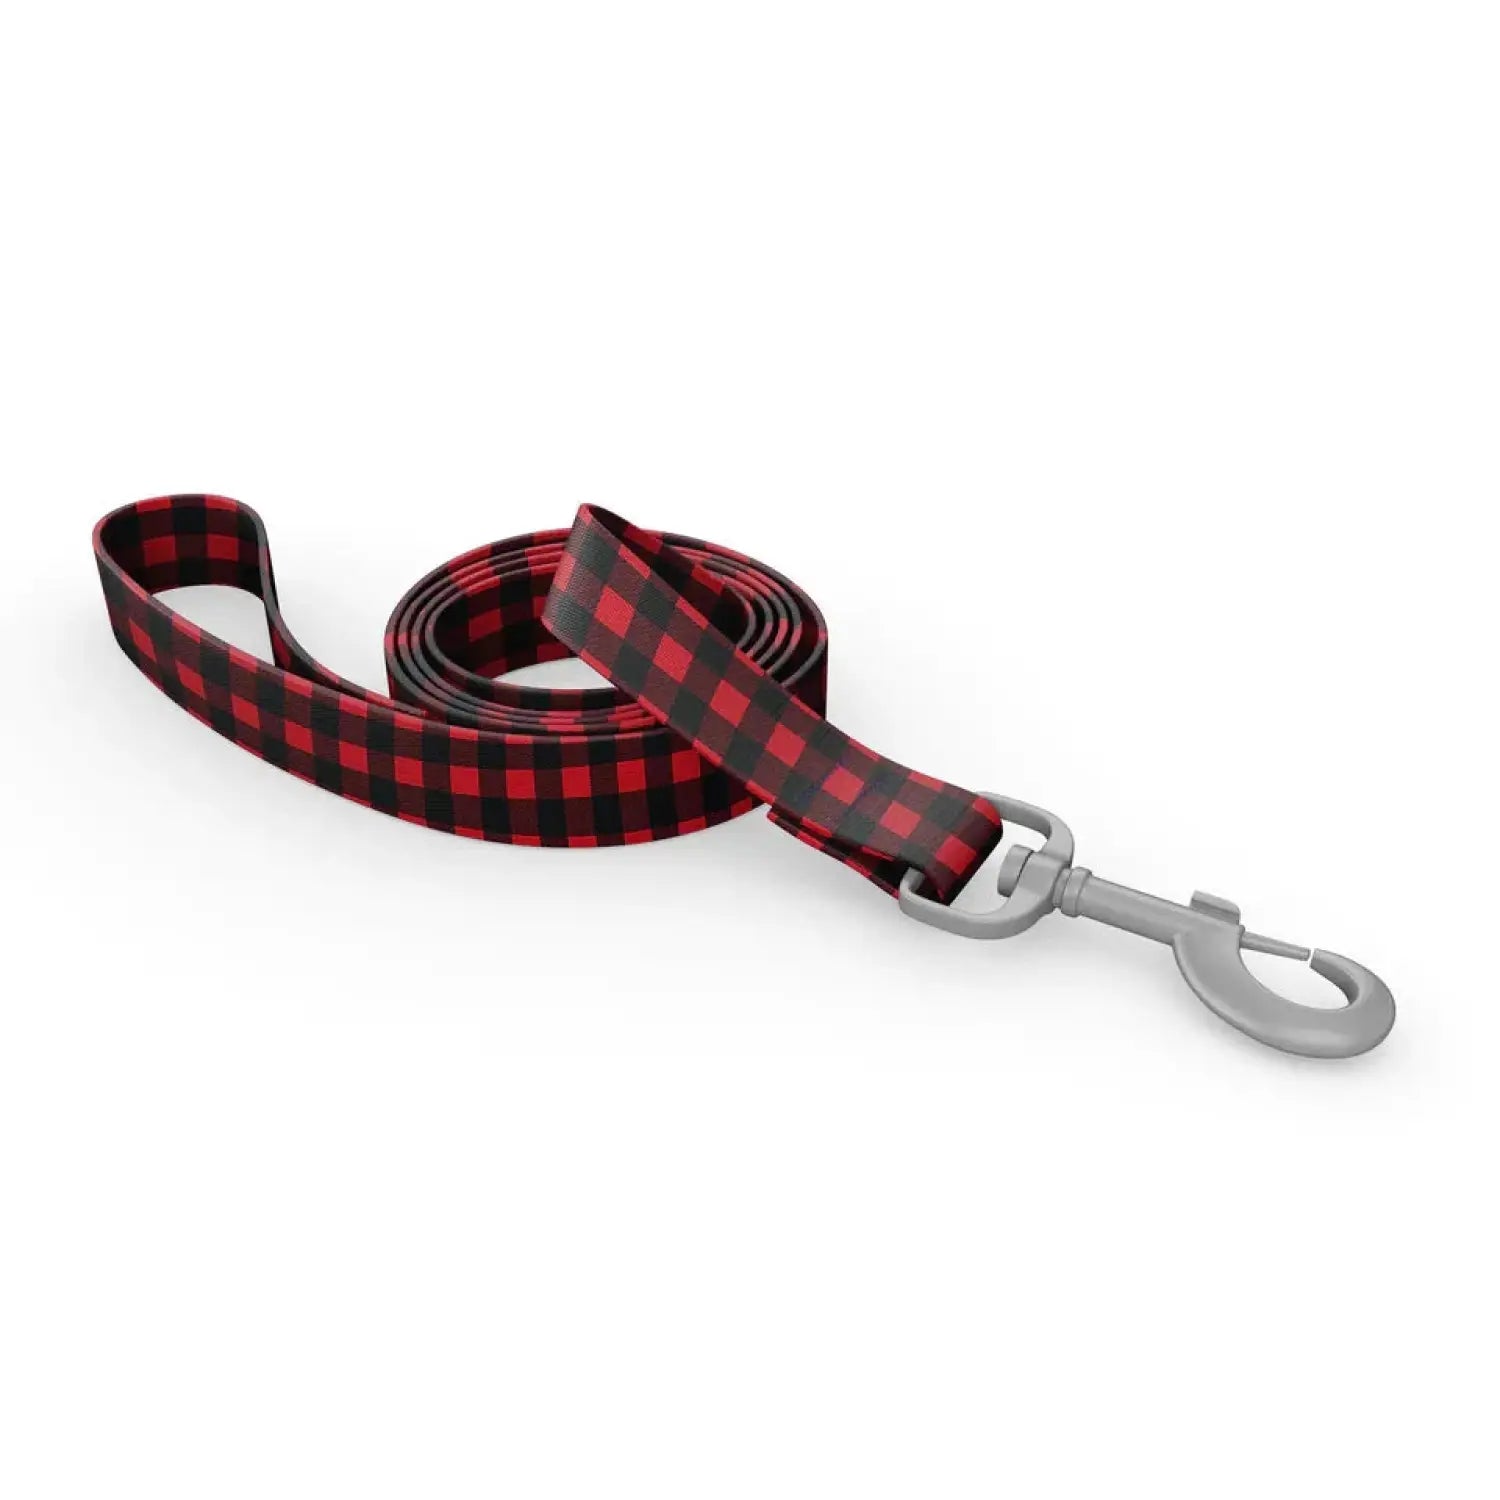 Wingo Outdoors Dog Leash in Buffalo Check design, black and red check plaid. 